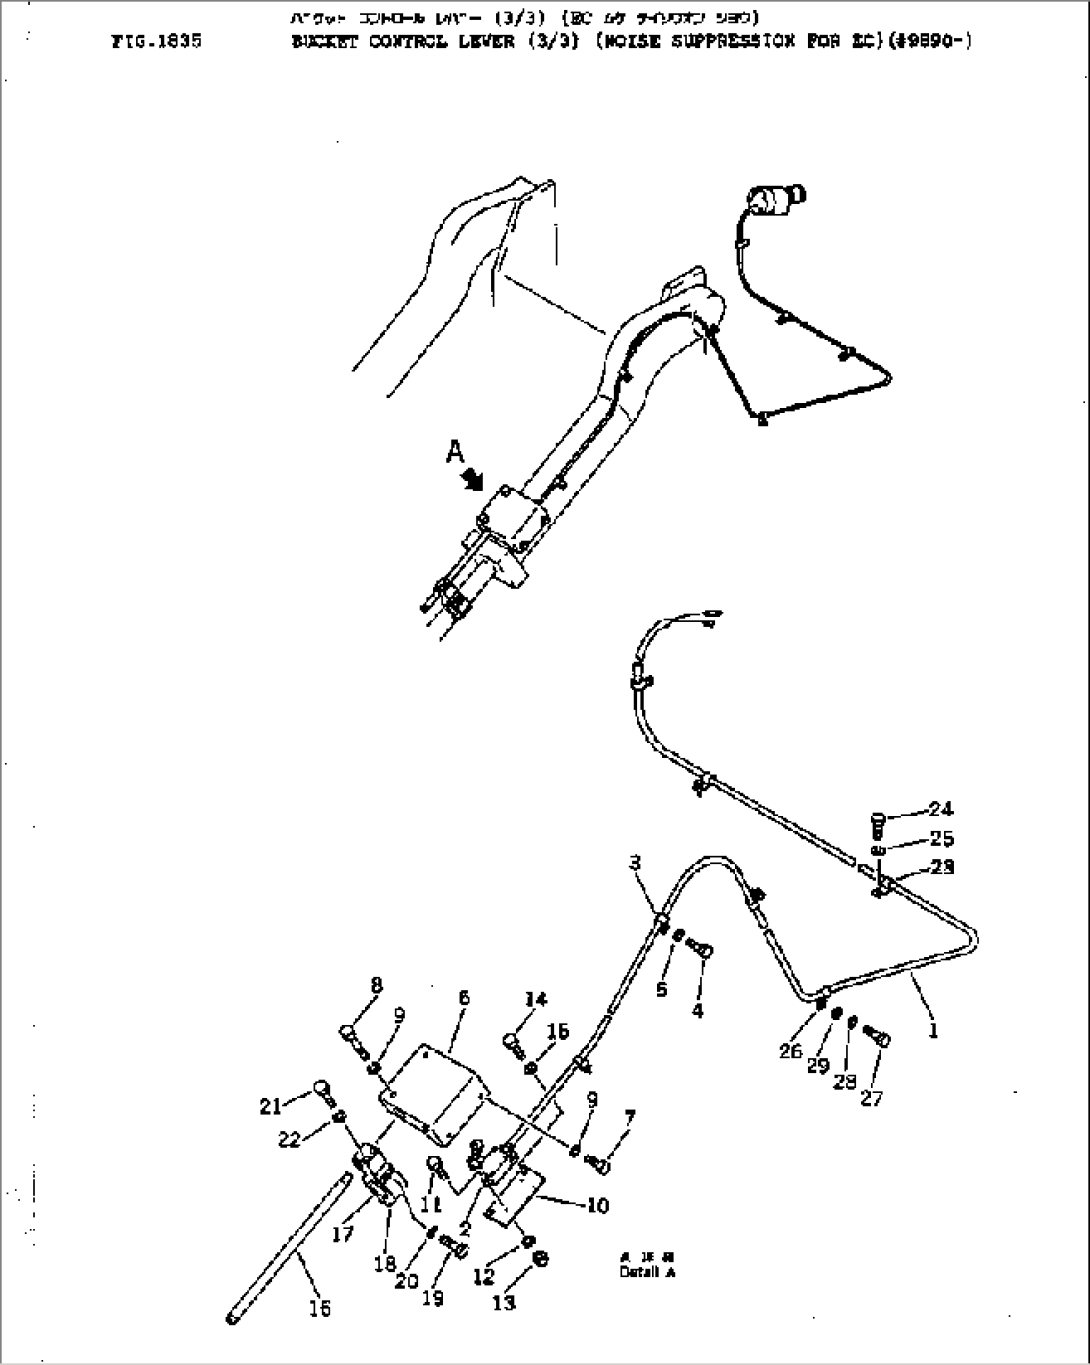 BUCKET CONTROL LEVER (3/3) (NOISE SUPPRESSION FOR EC)(#9890-)